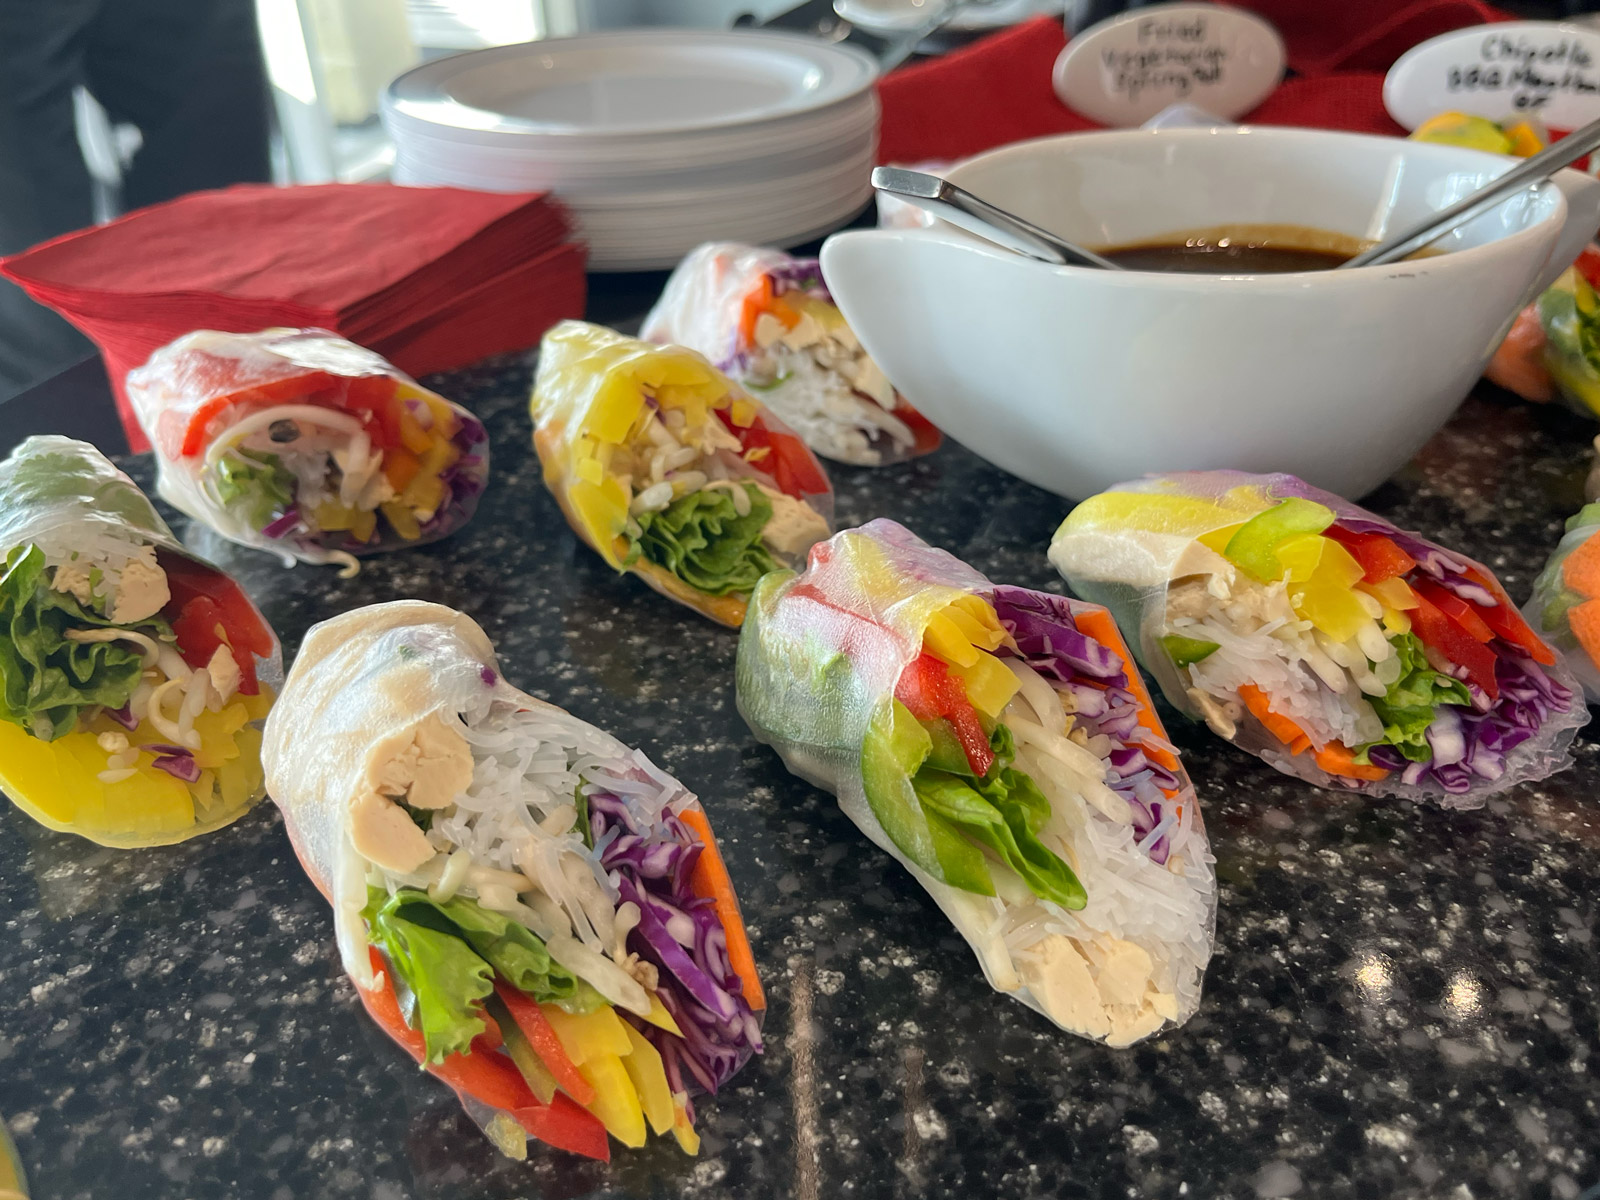 Vegetable spring rolls crafted by University Catering for an event at the Willa Cather Dining Complex on April 11, 2022.